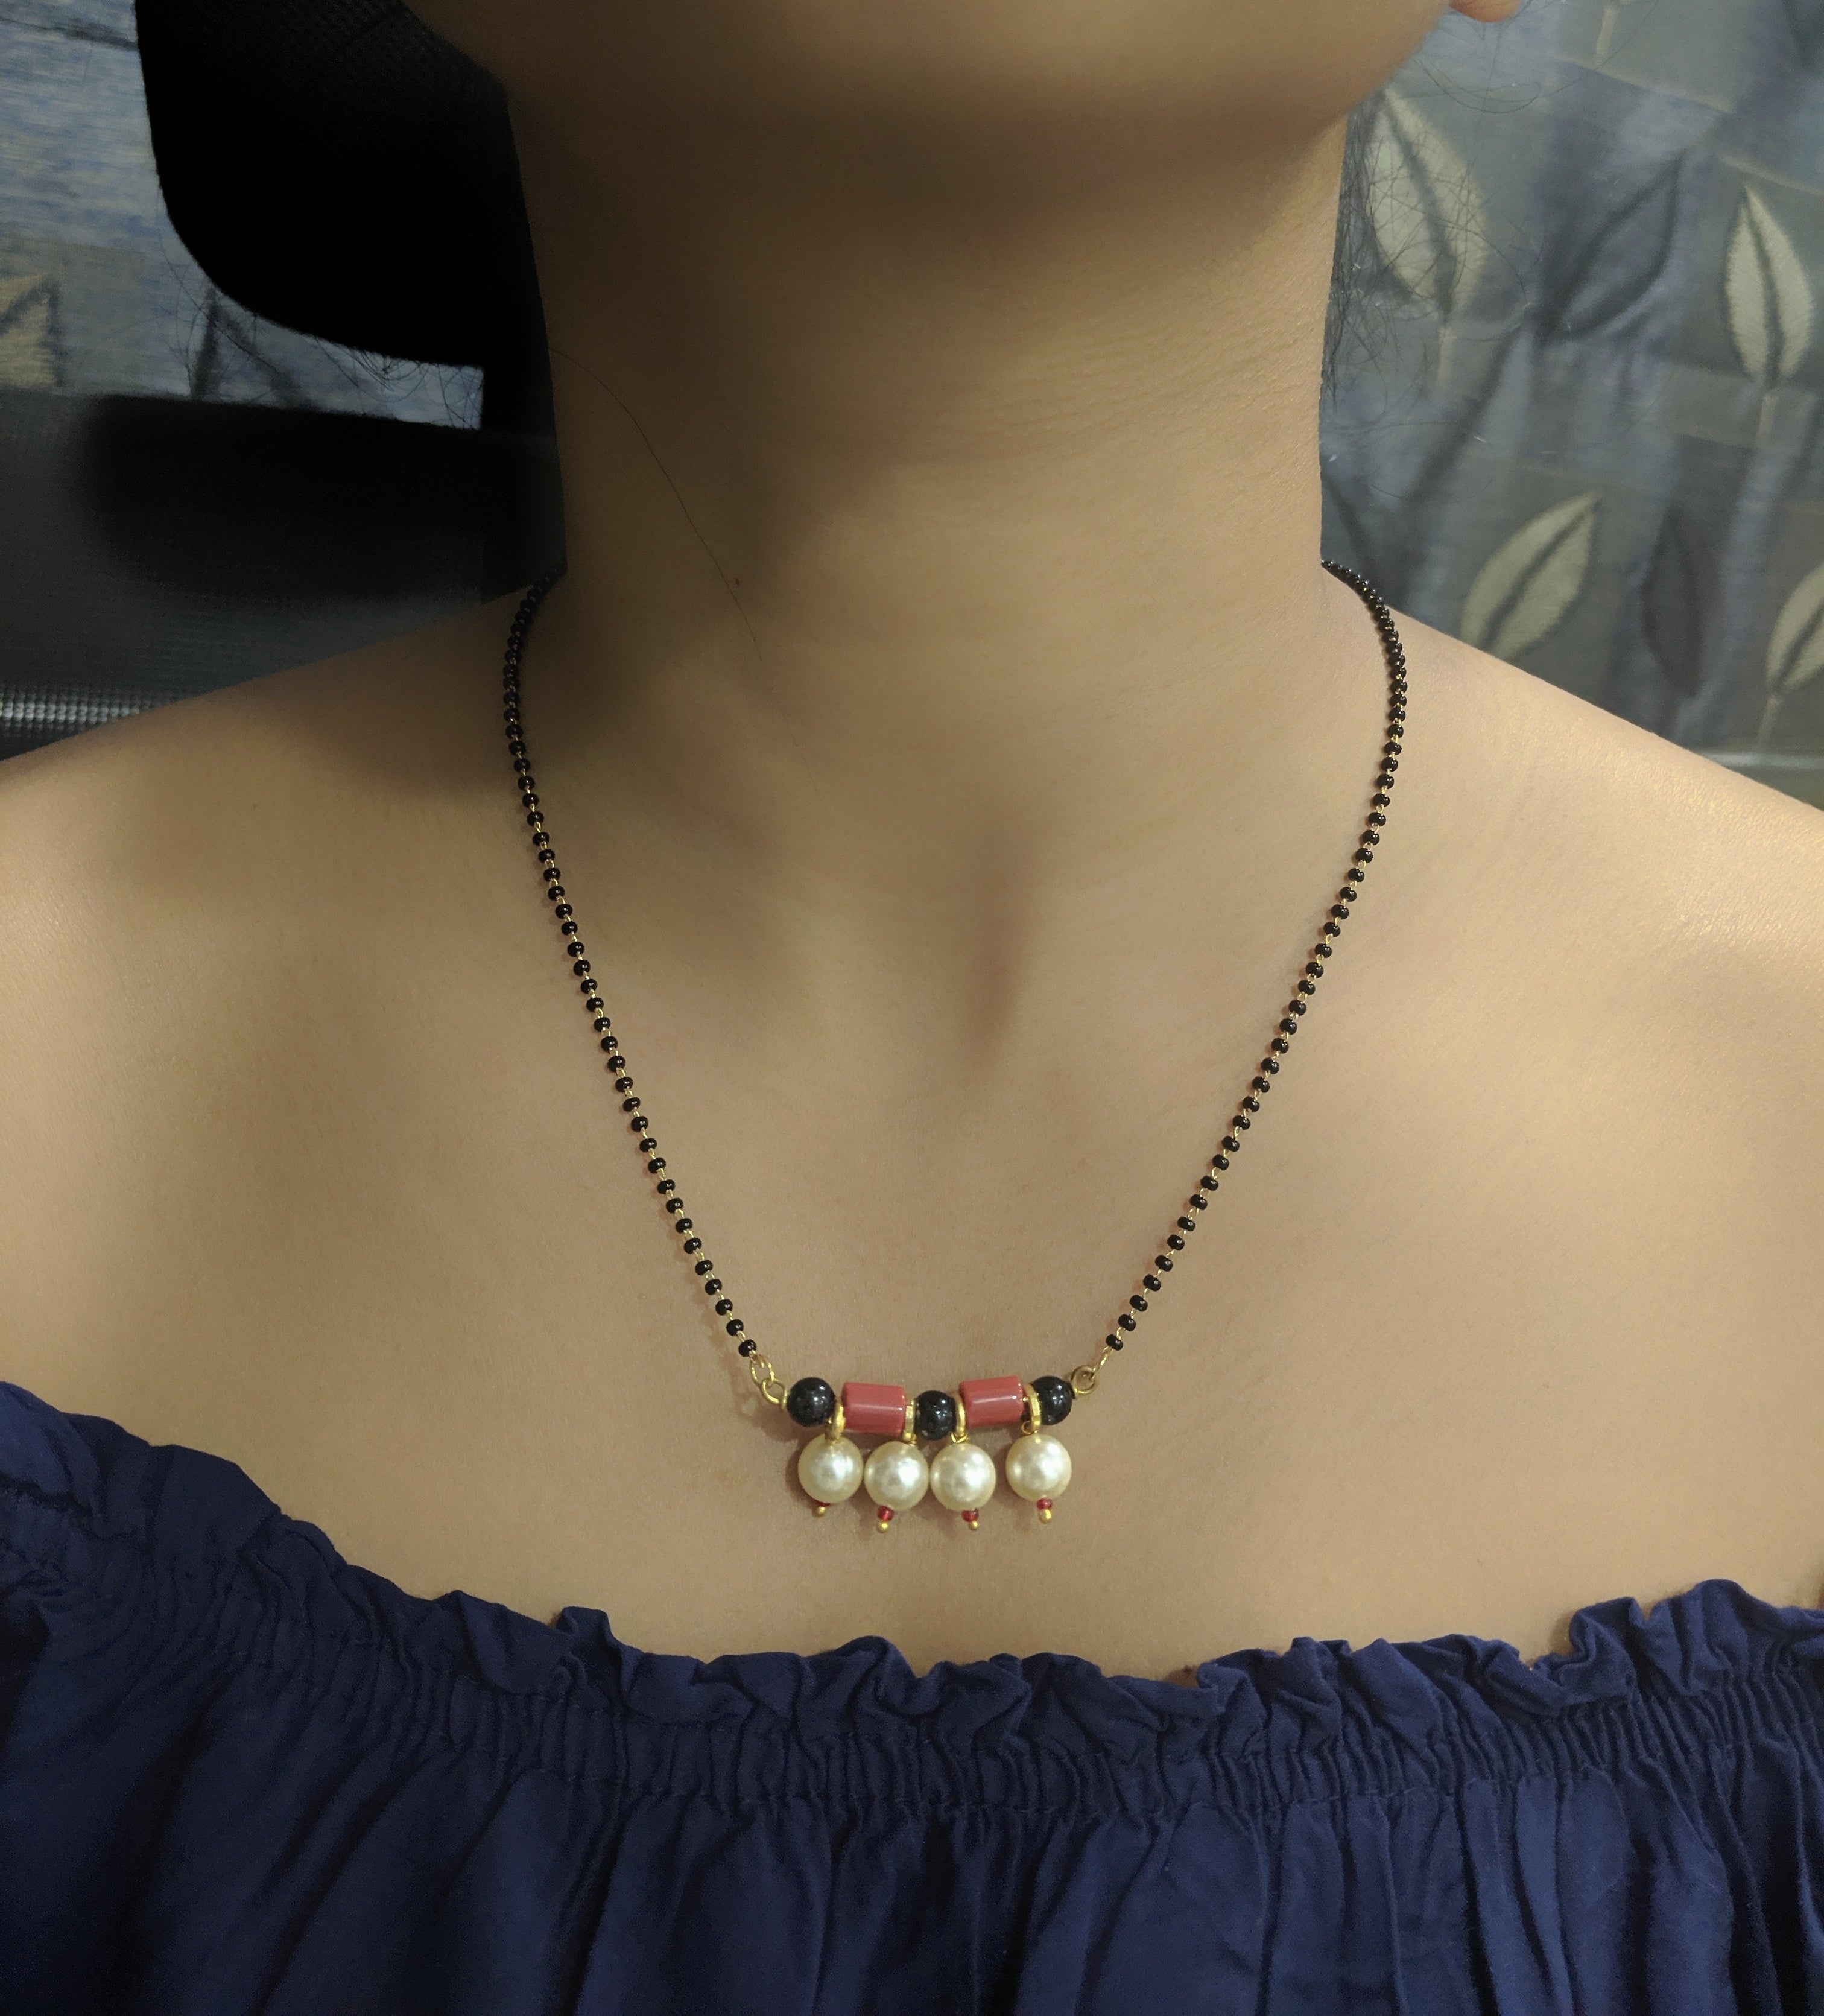 image for Short Mangalsutra Designs Gold Plated Latest Coral White Pearls Pendant Black Beads Mangalsutra